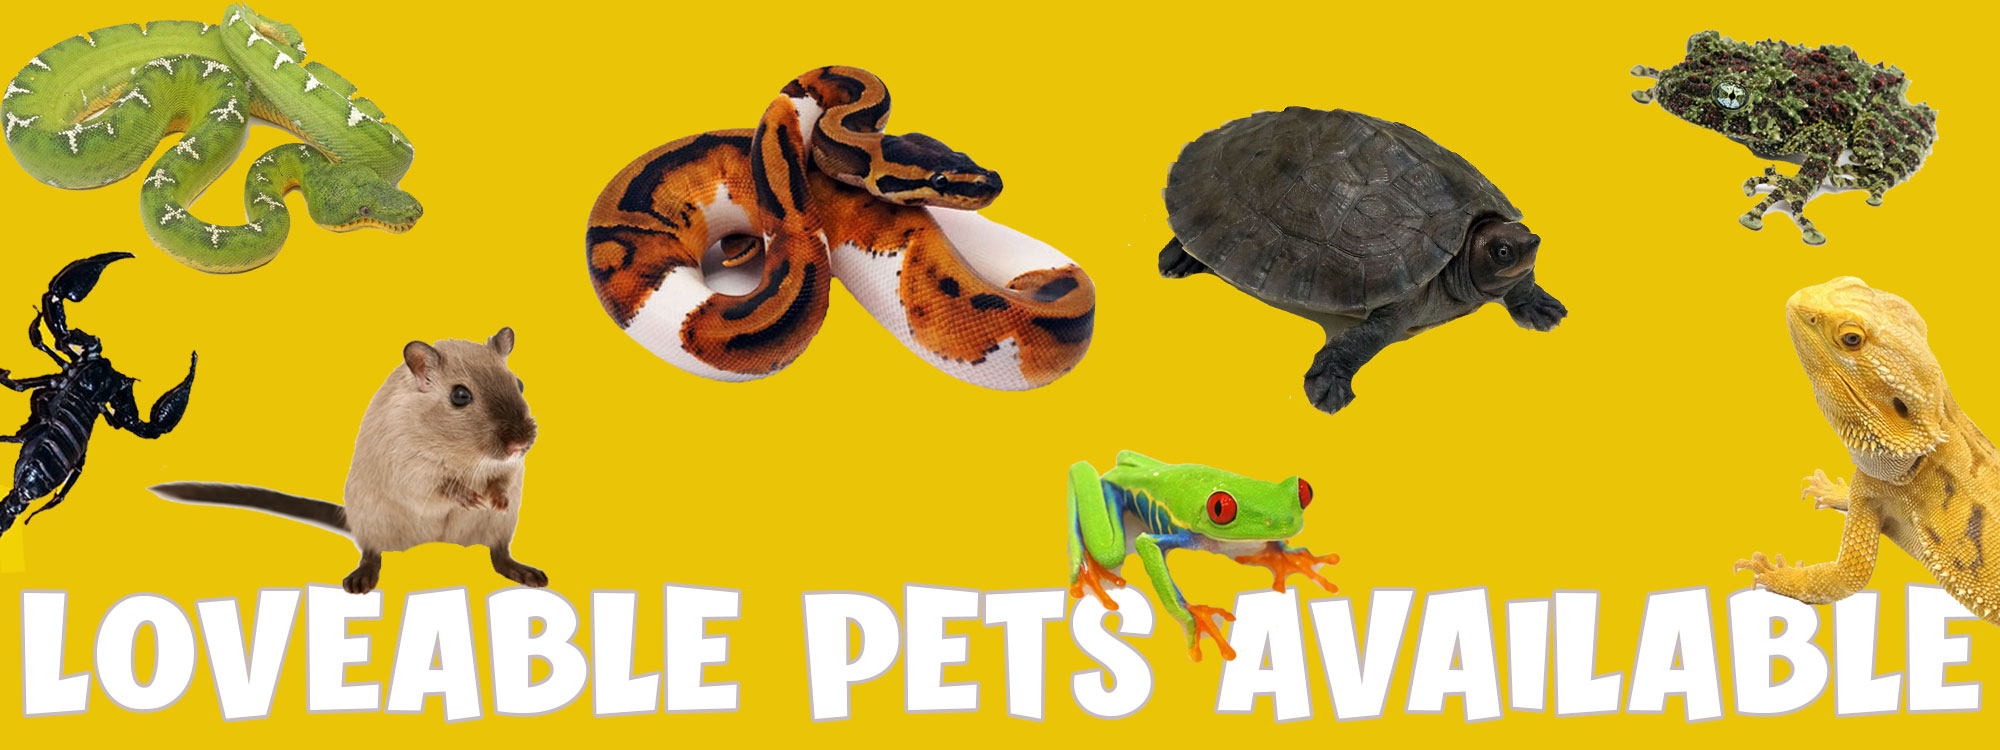 Pets For Sale - Reptiles, Lizards, Amphibians, Tarantulas and More | Zoo  Creatures New England